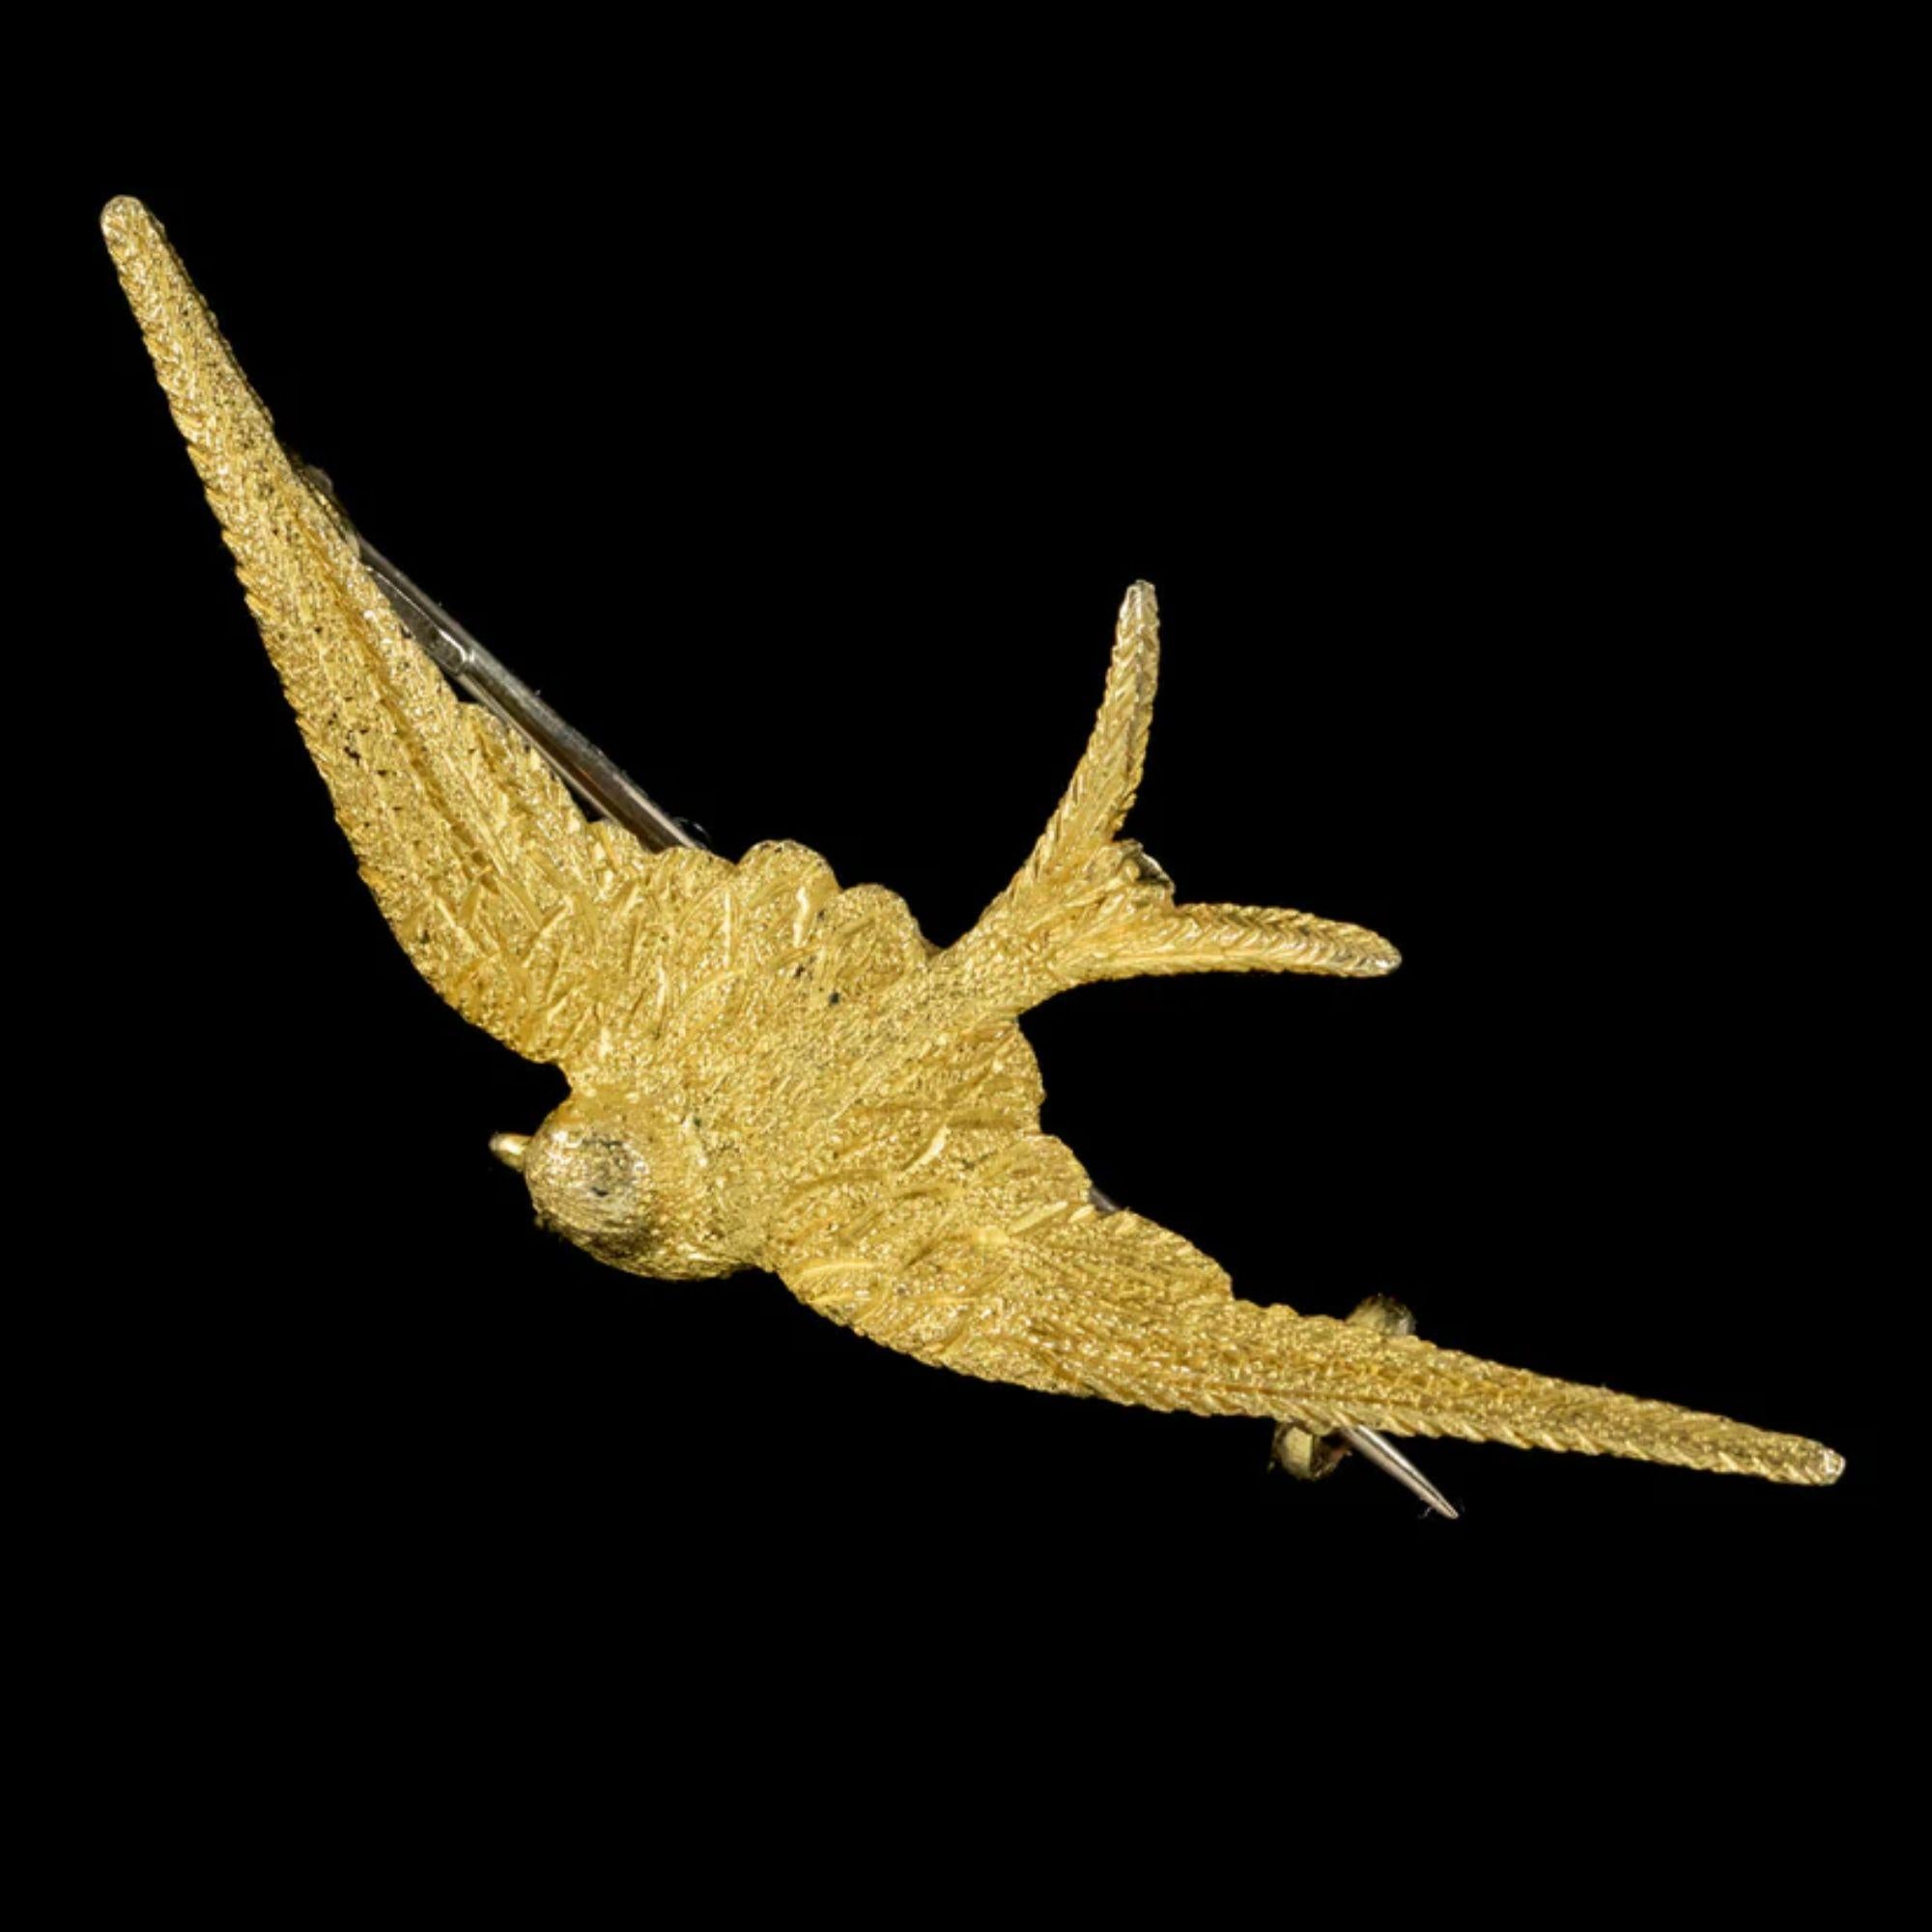 A sweet antique swallow brooch from the late Victorian era, fashioned in 15ct gold with intricate, feathered texturing across the back and front.

The image of a swallow was popular during the Victorian era and was often gifted as a romantic token